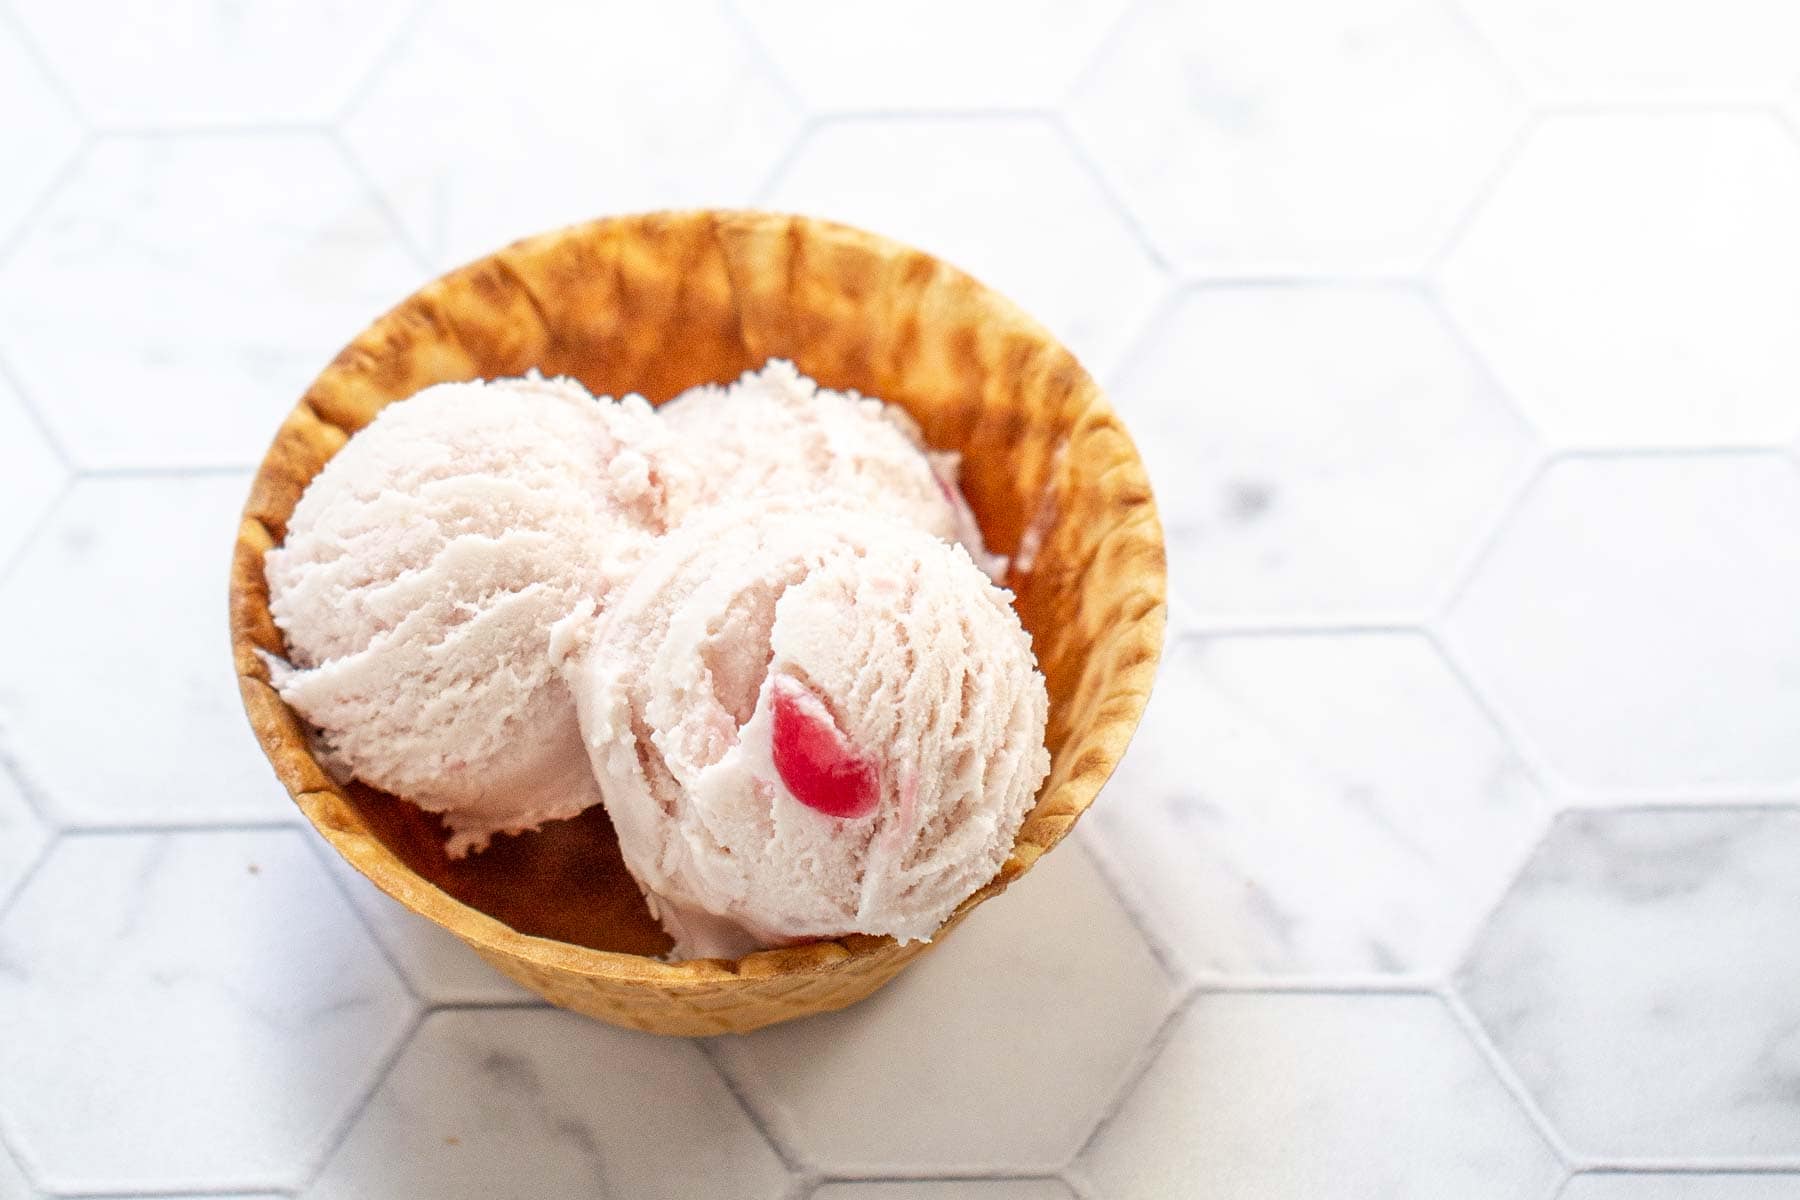 A waffle bowl contains three scoops of pink ice cream with a small red piece of fruit on top, set on a white hexagonal tiled surface.